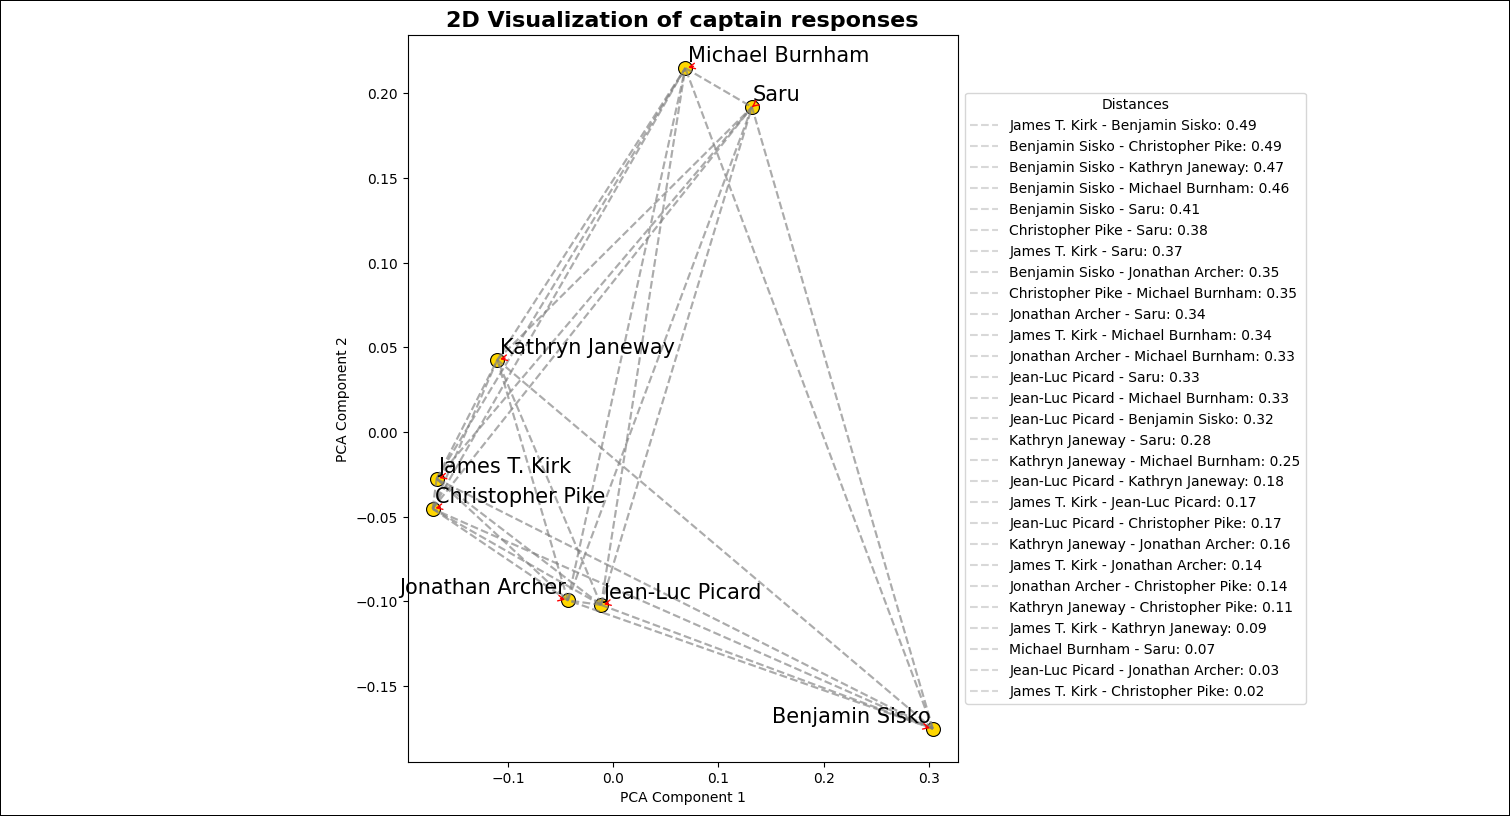 Screenshot of the image created by the plot_embeddings task showing the two dimensional representation of the closeness of answers associated with different Star Trek captains.